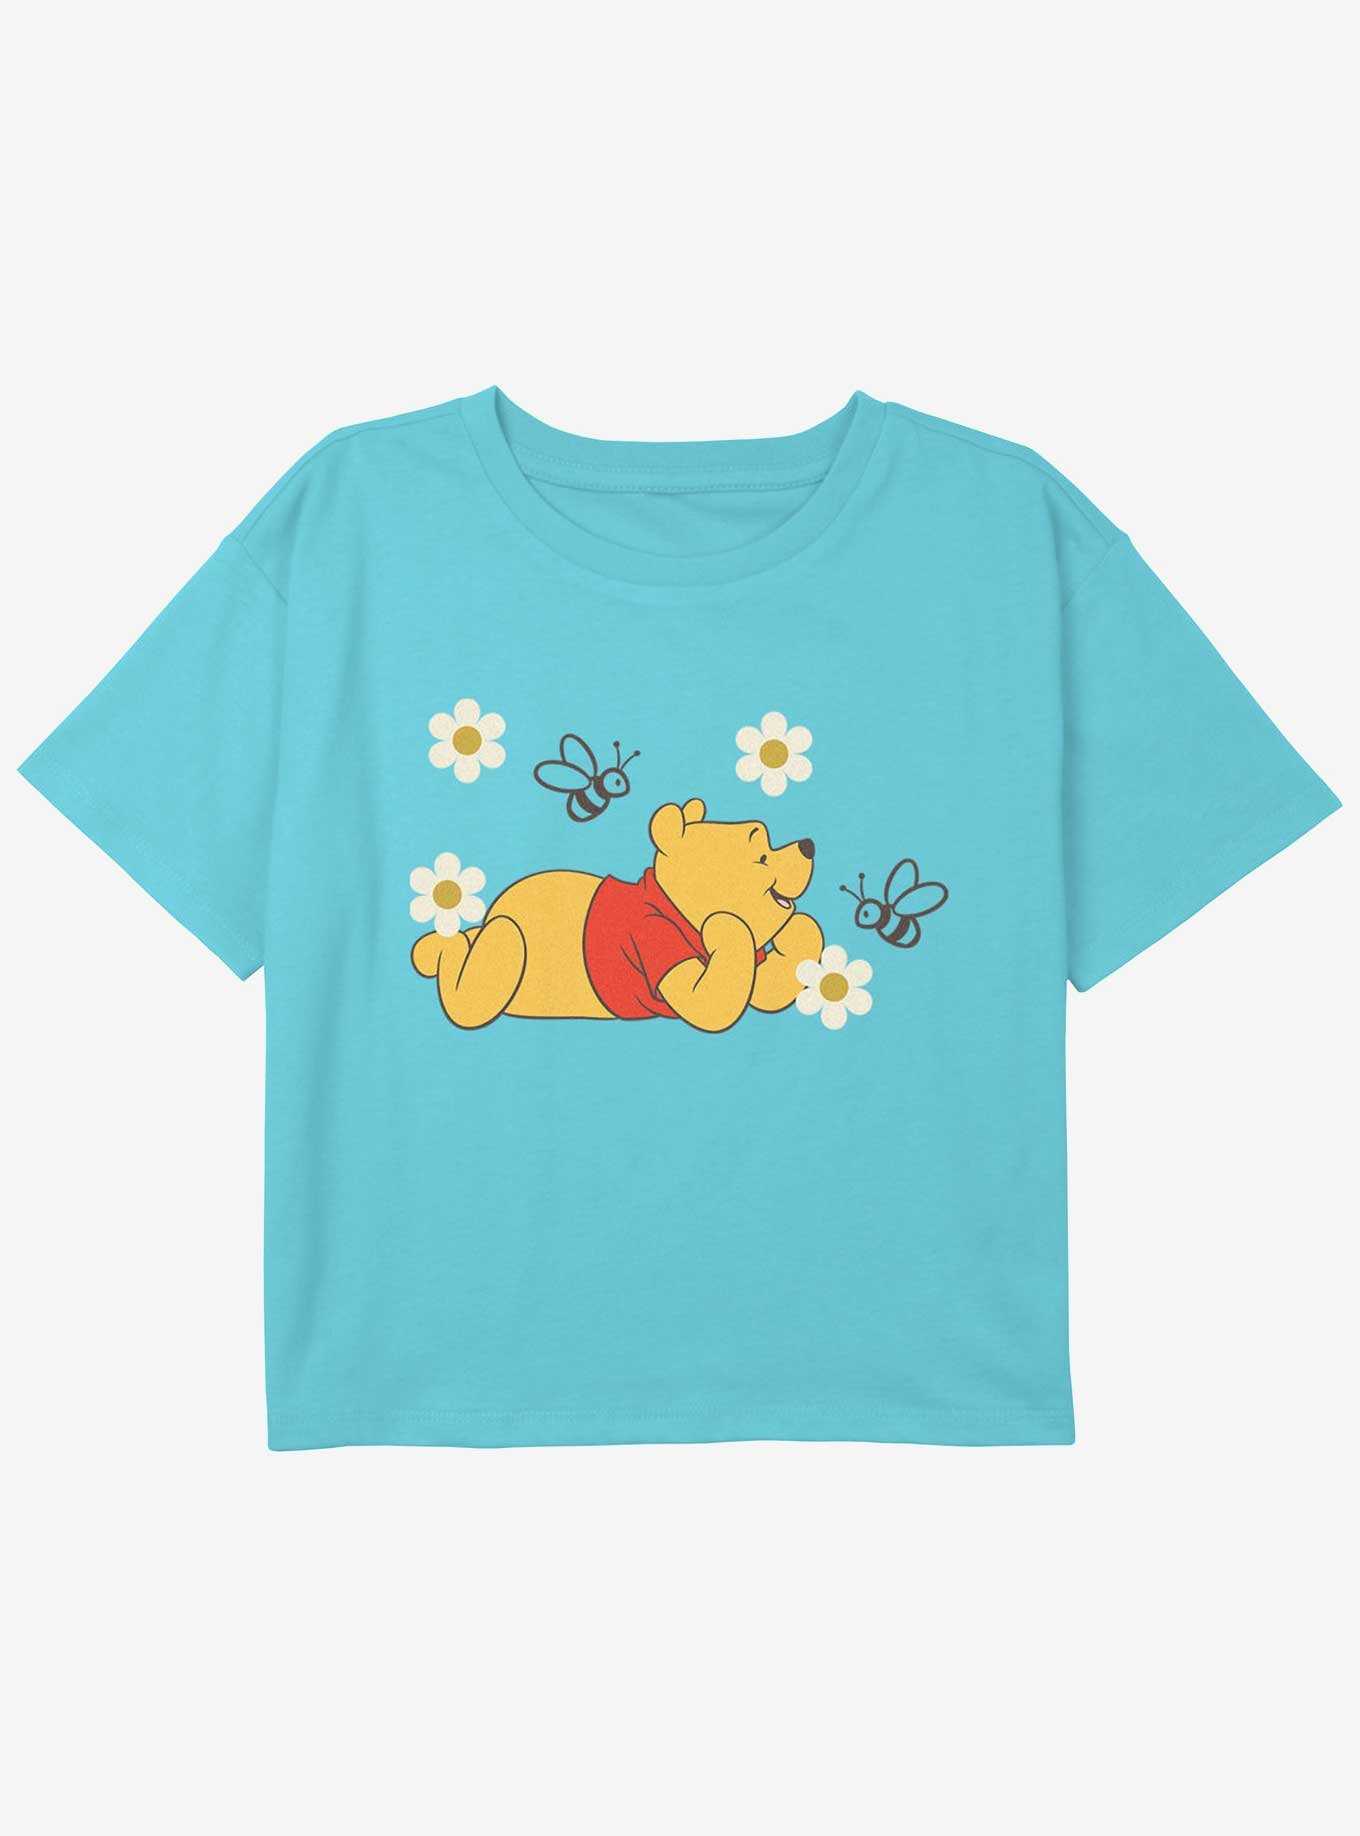 Disney Winnie The Pooh Bear and Bees Girls Youth Crop T-Shirt, , hi-res